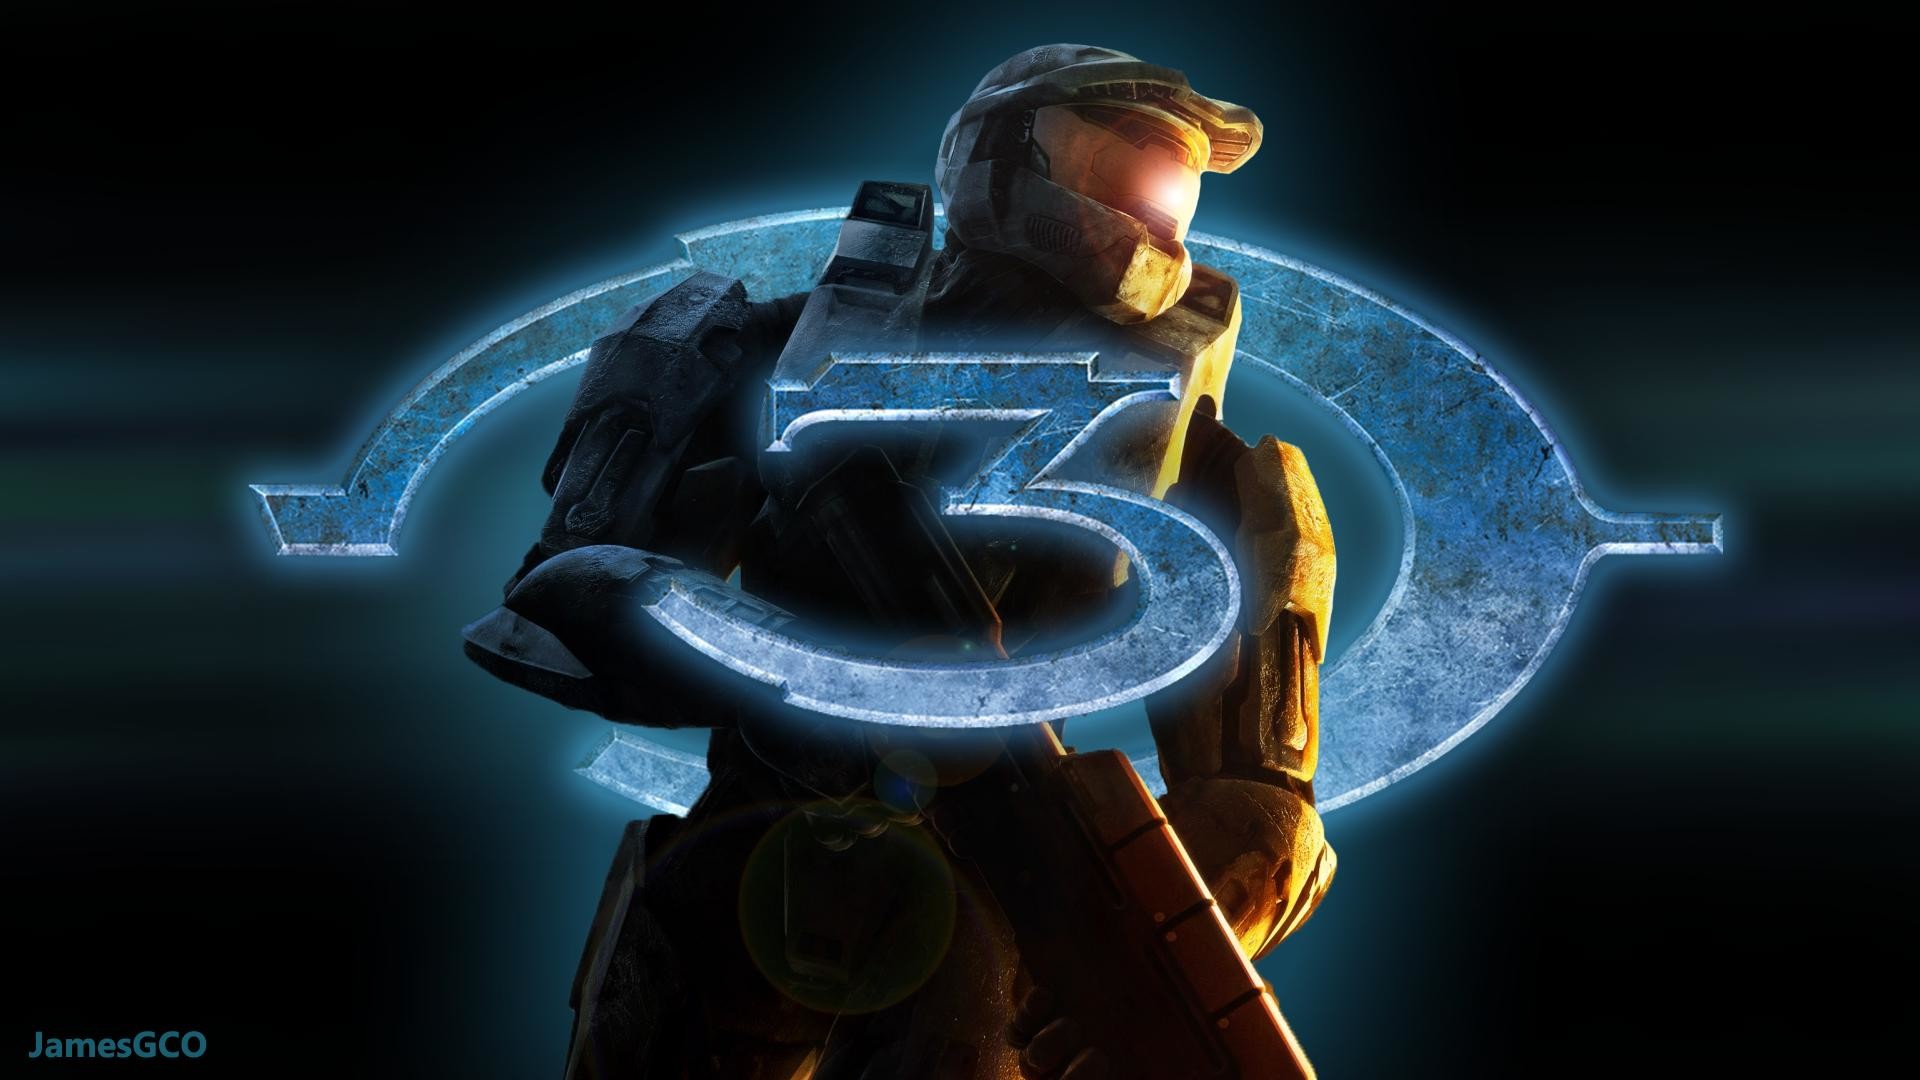 1920x1080 Halo 3 wallpaper I recently made.